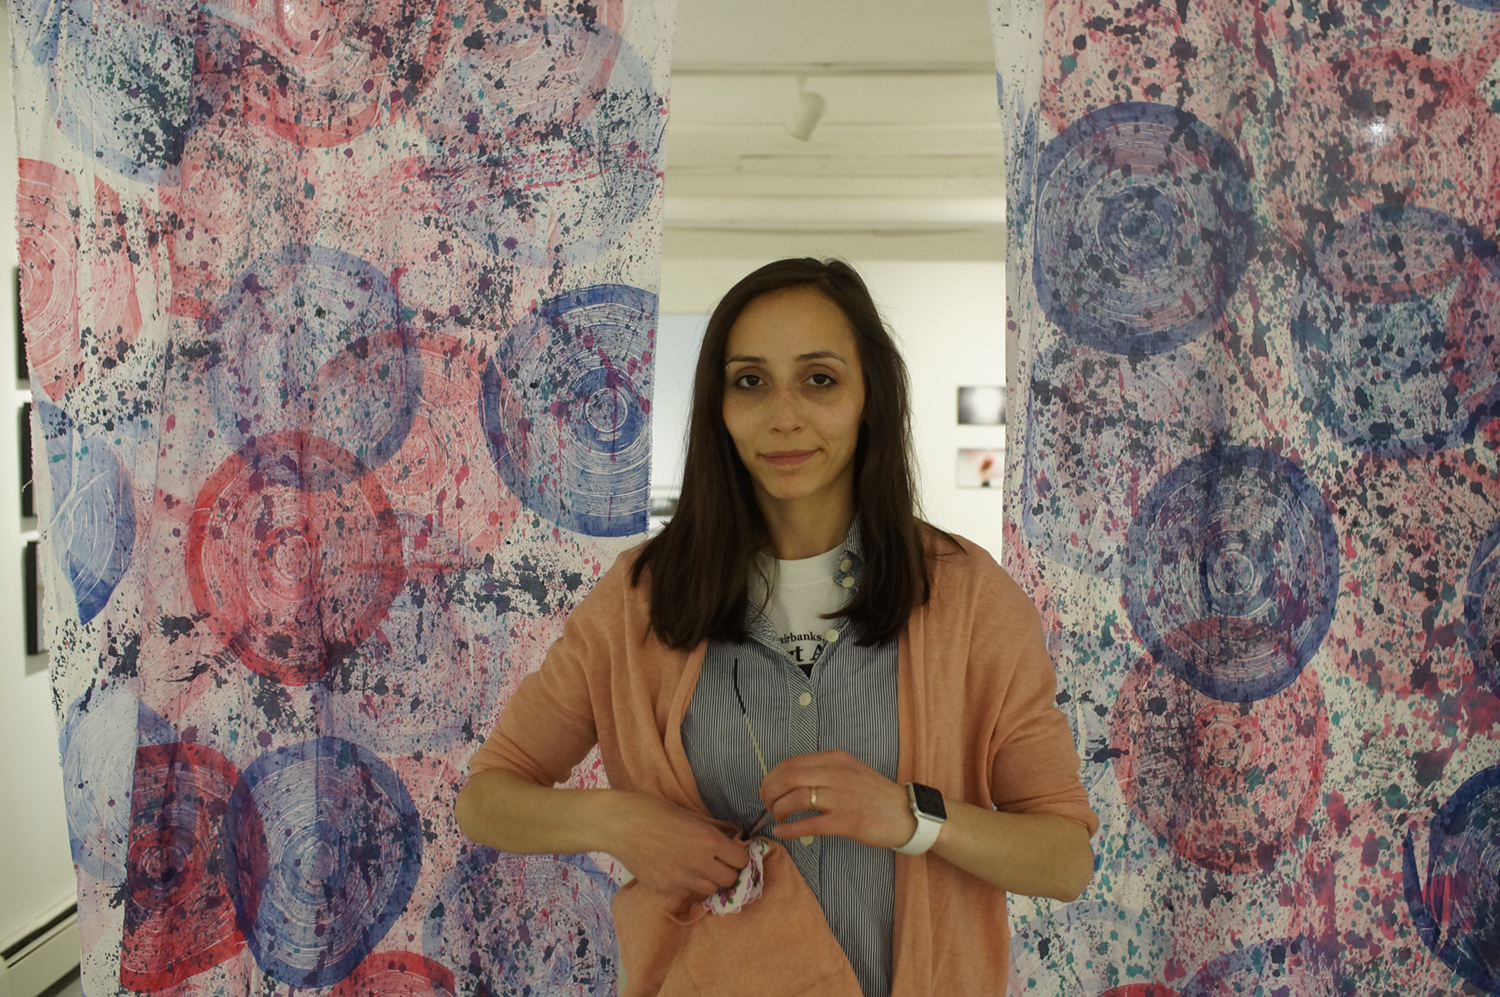 Naomi Hutchquist poses at the entrance to her 2019 BFA thesis exhibition, Wheels of Life, held at the Well Steet Art Company gallery. Image courtesy of Naomi Hutchquist